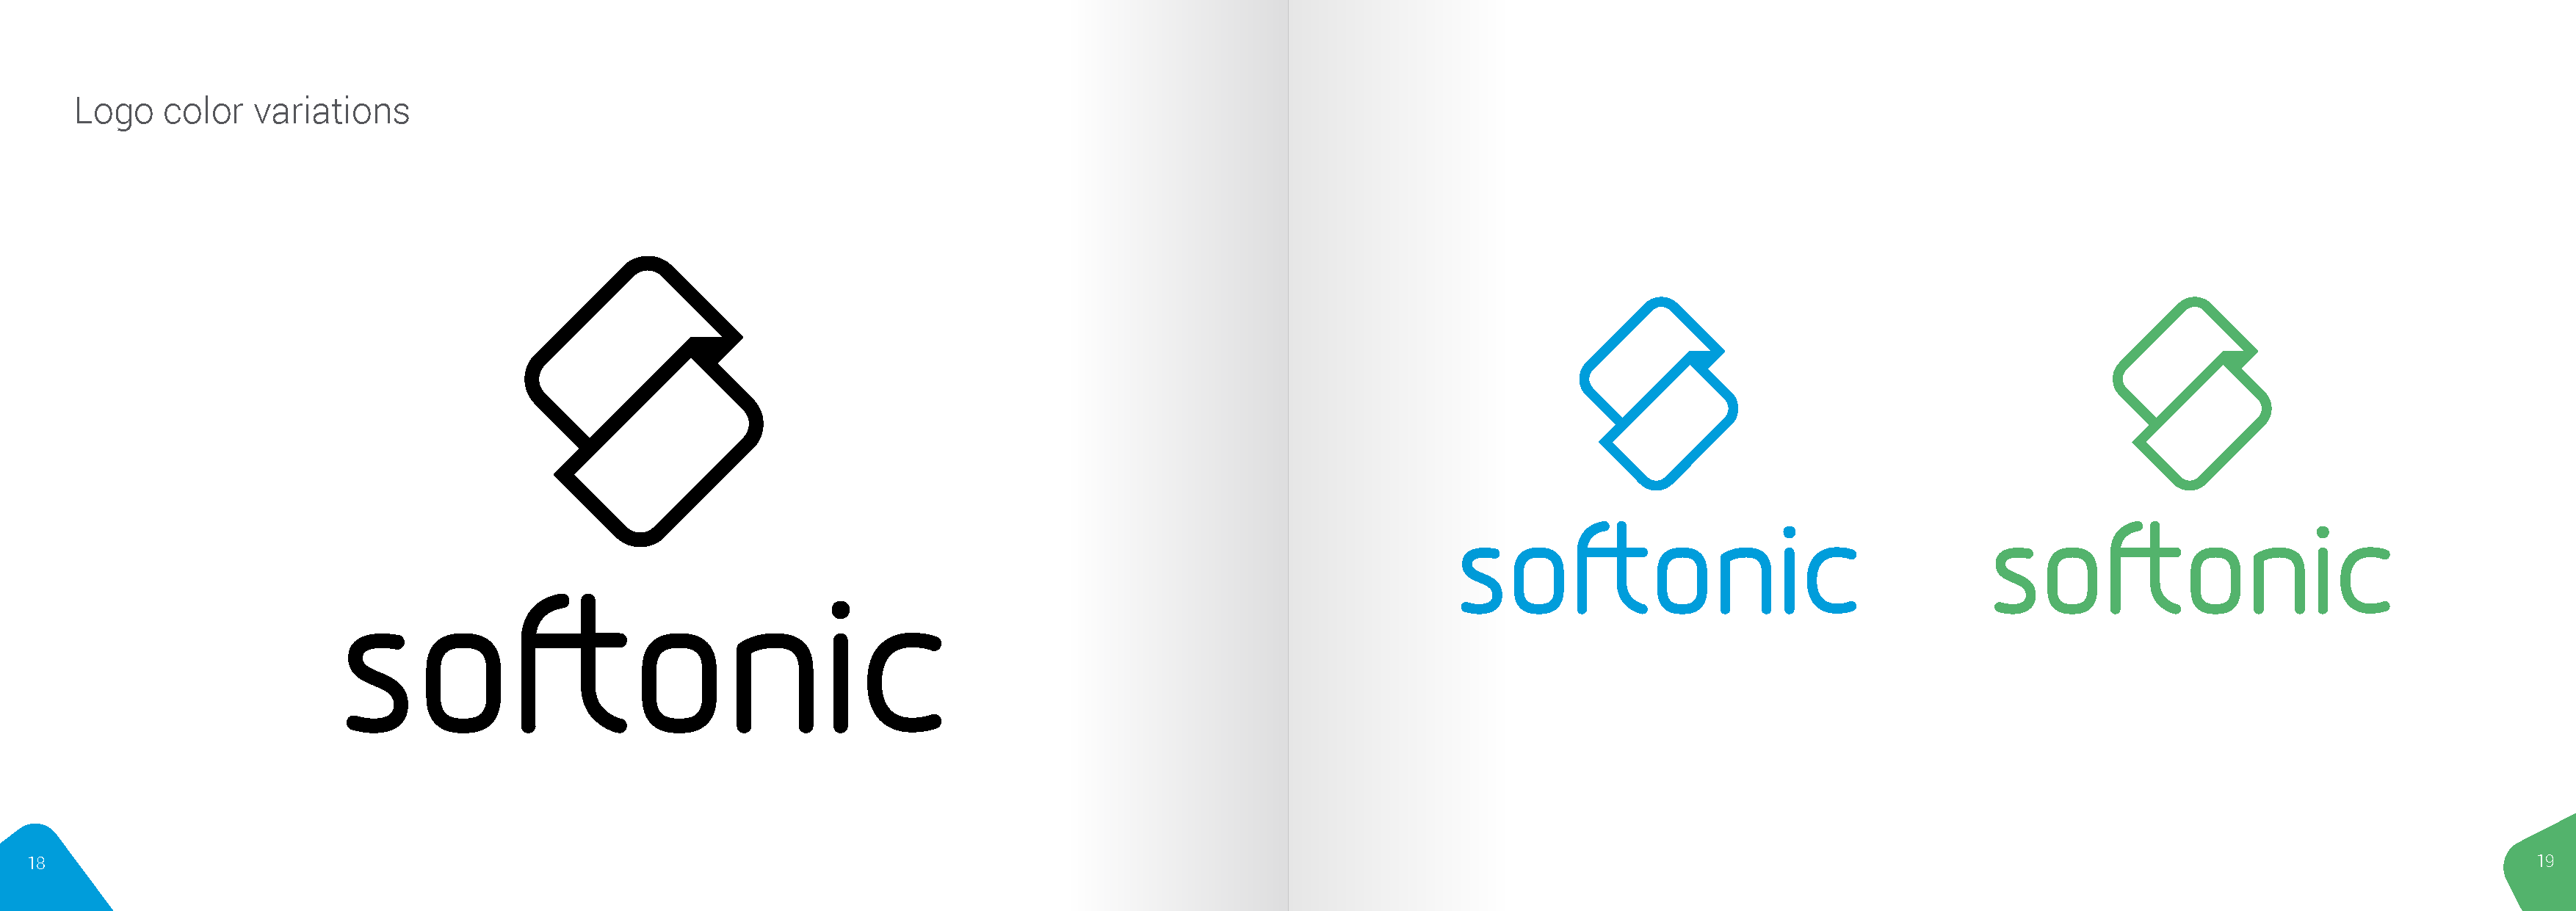 Softonic-Brand-Guidelines_Page_10